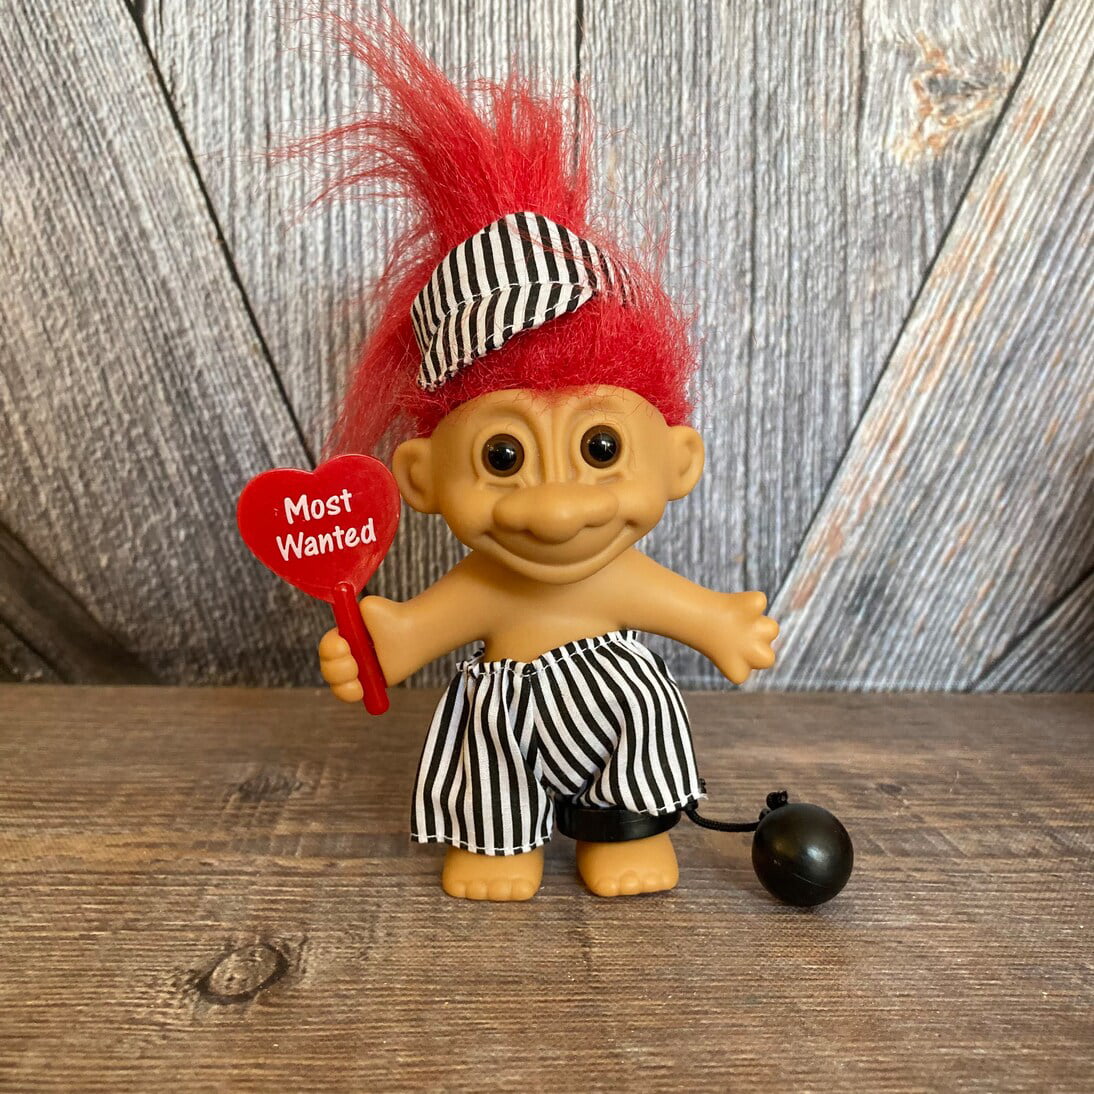 Vintage Day Troll {Most Wanted Prisoner Ball and Chain Love Troll} Russ Berrie Troll Doll Red Hair 5 inch troll Gift - Walmart.com